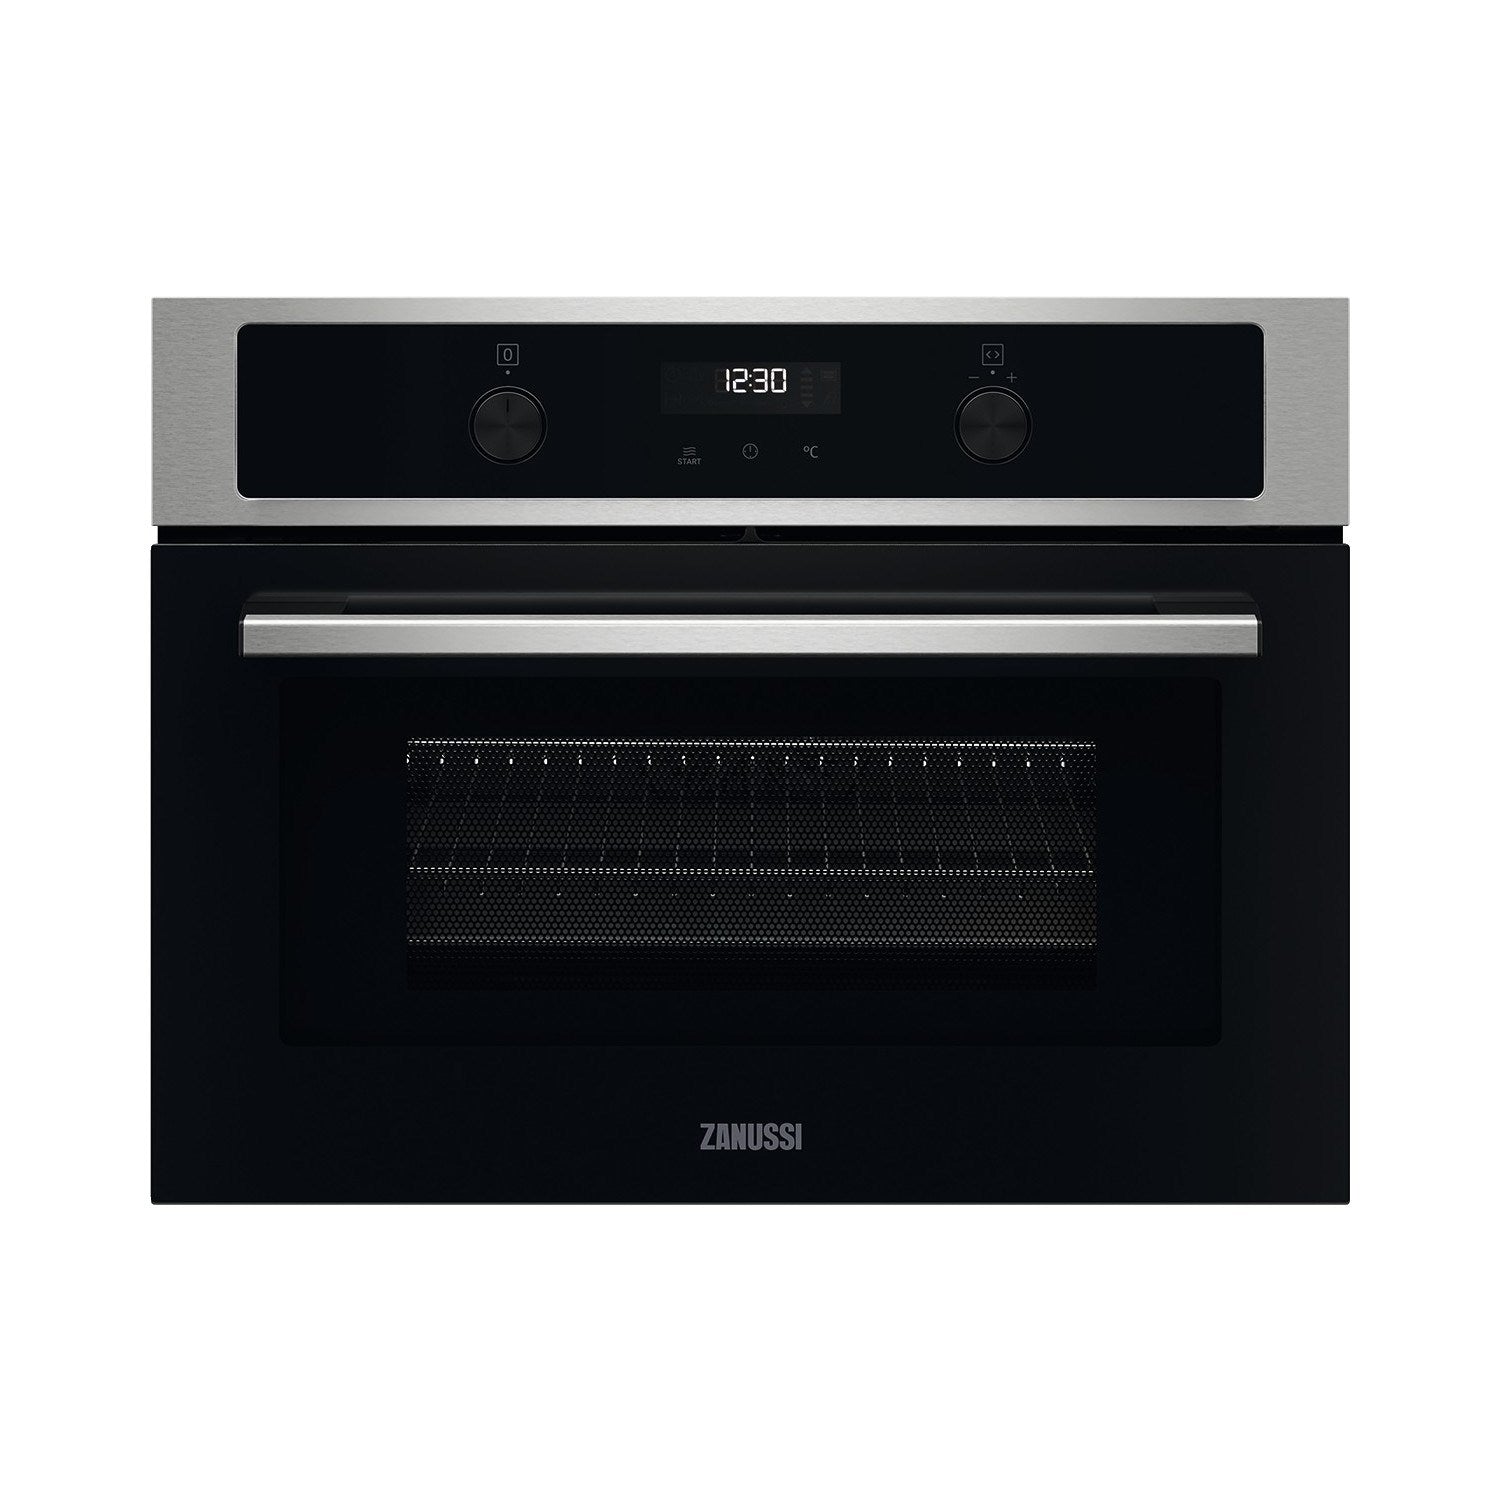 Zanussi ZVENM7X1 Compact Microwave Built in Oven Grill Stainless Steel GRADE B